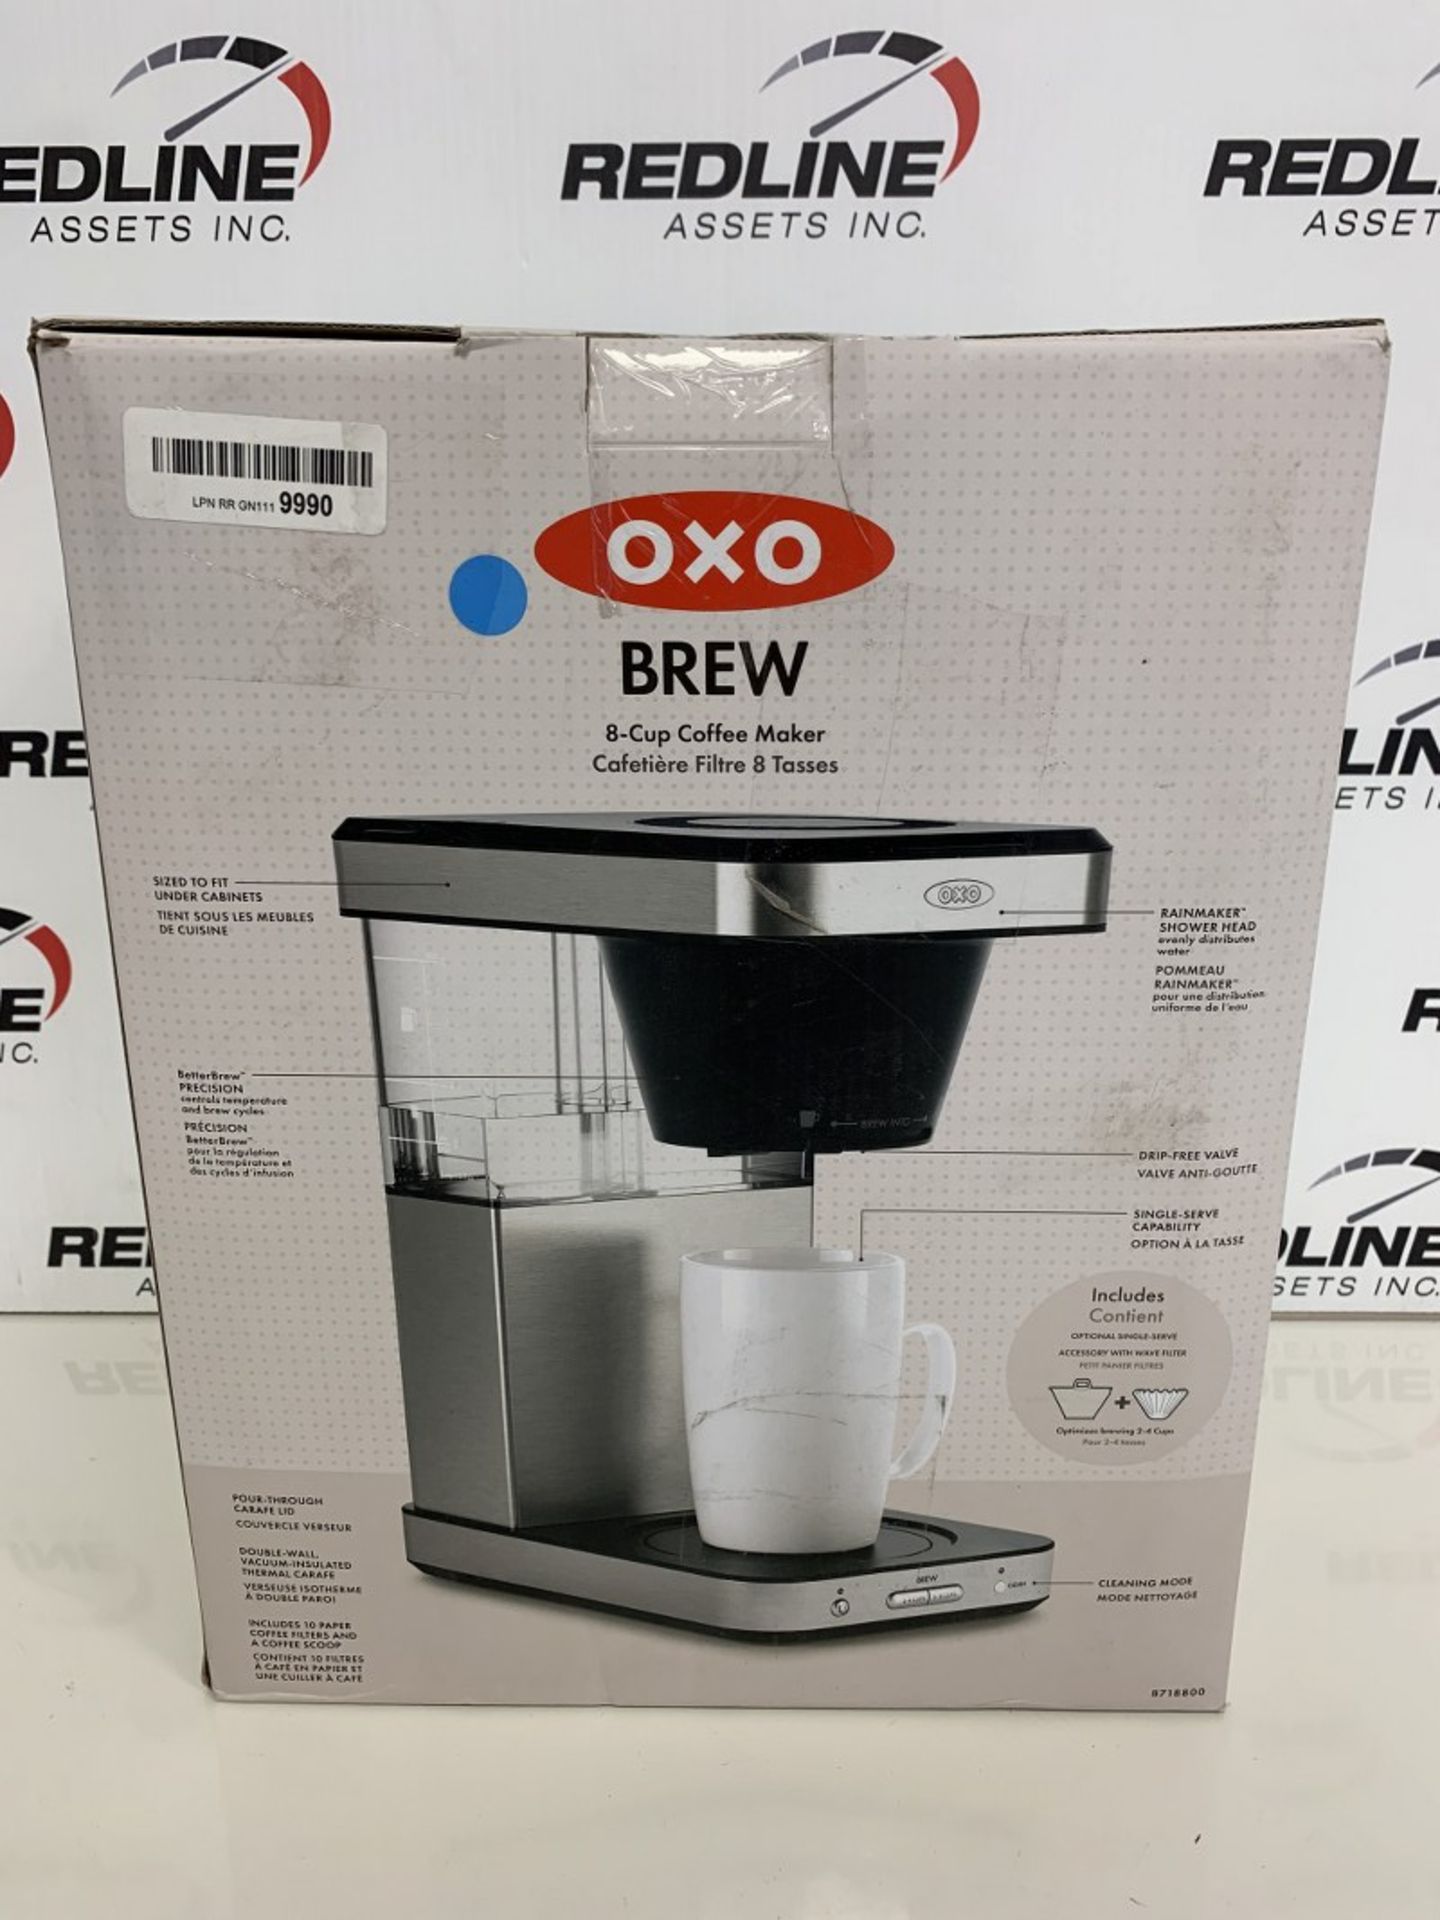 Oxo - Brew - 8 Cup Coffee Maker - Image 2 of 2